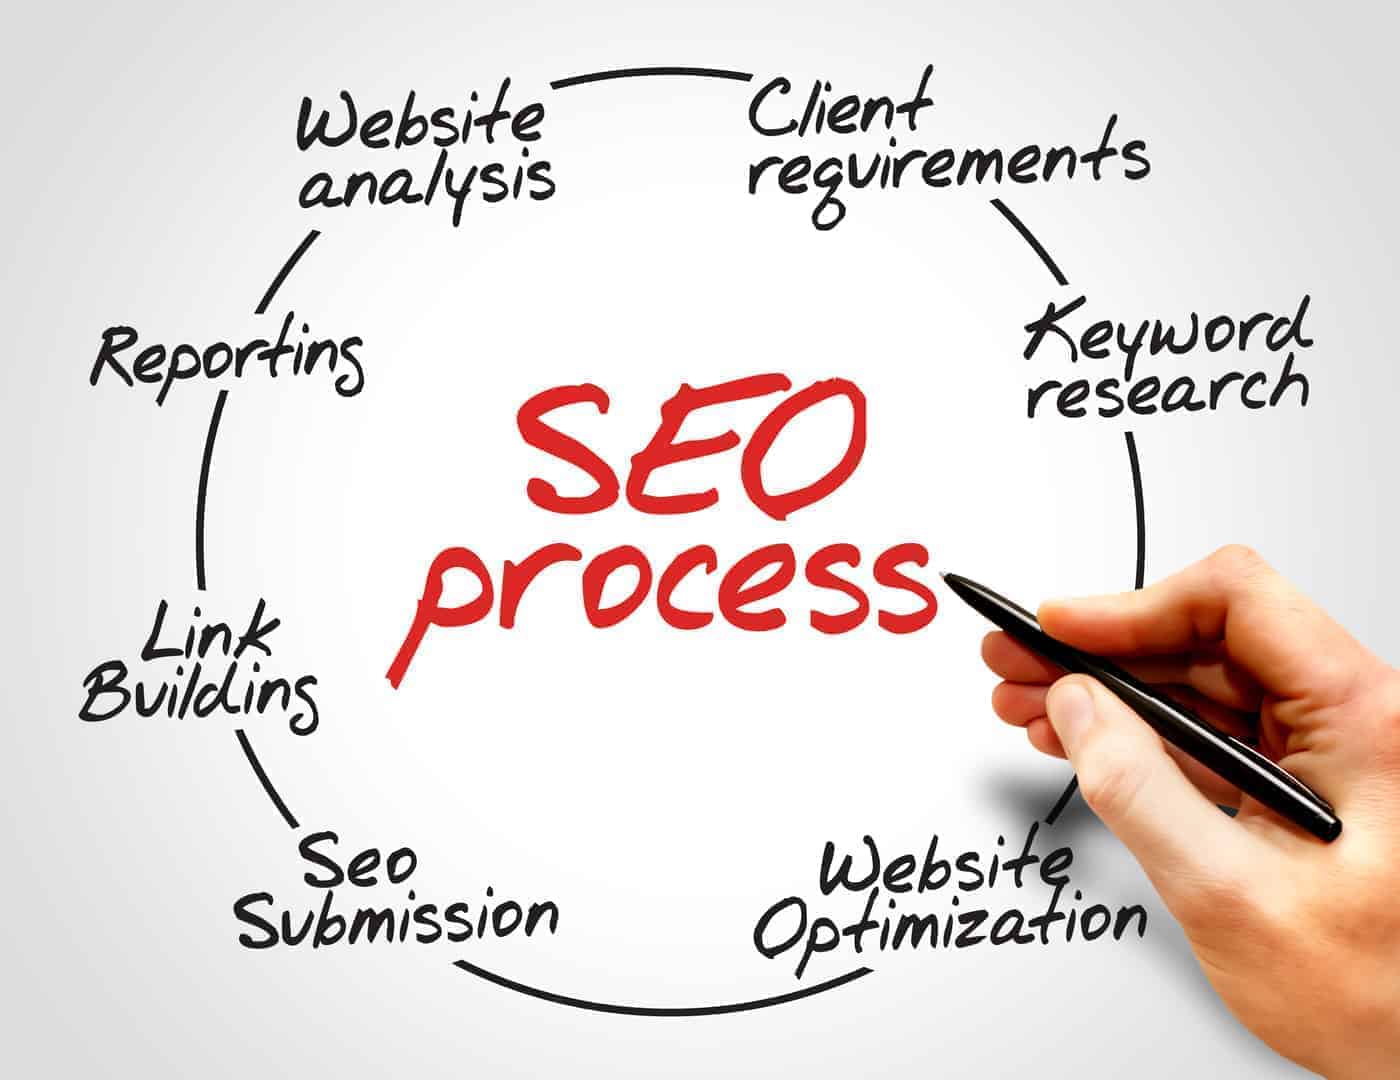 What Simple Steps Can You Take Towards an SEO Friendly Site?